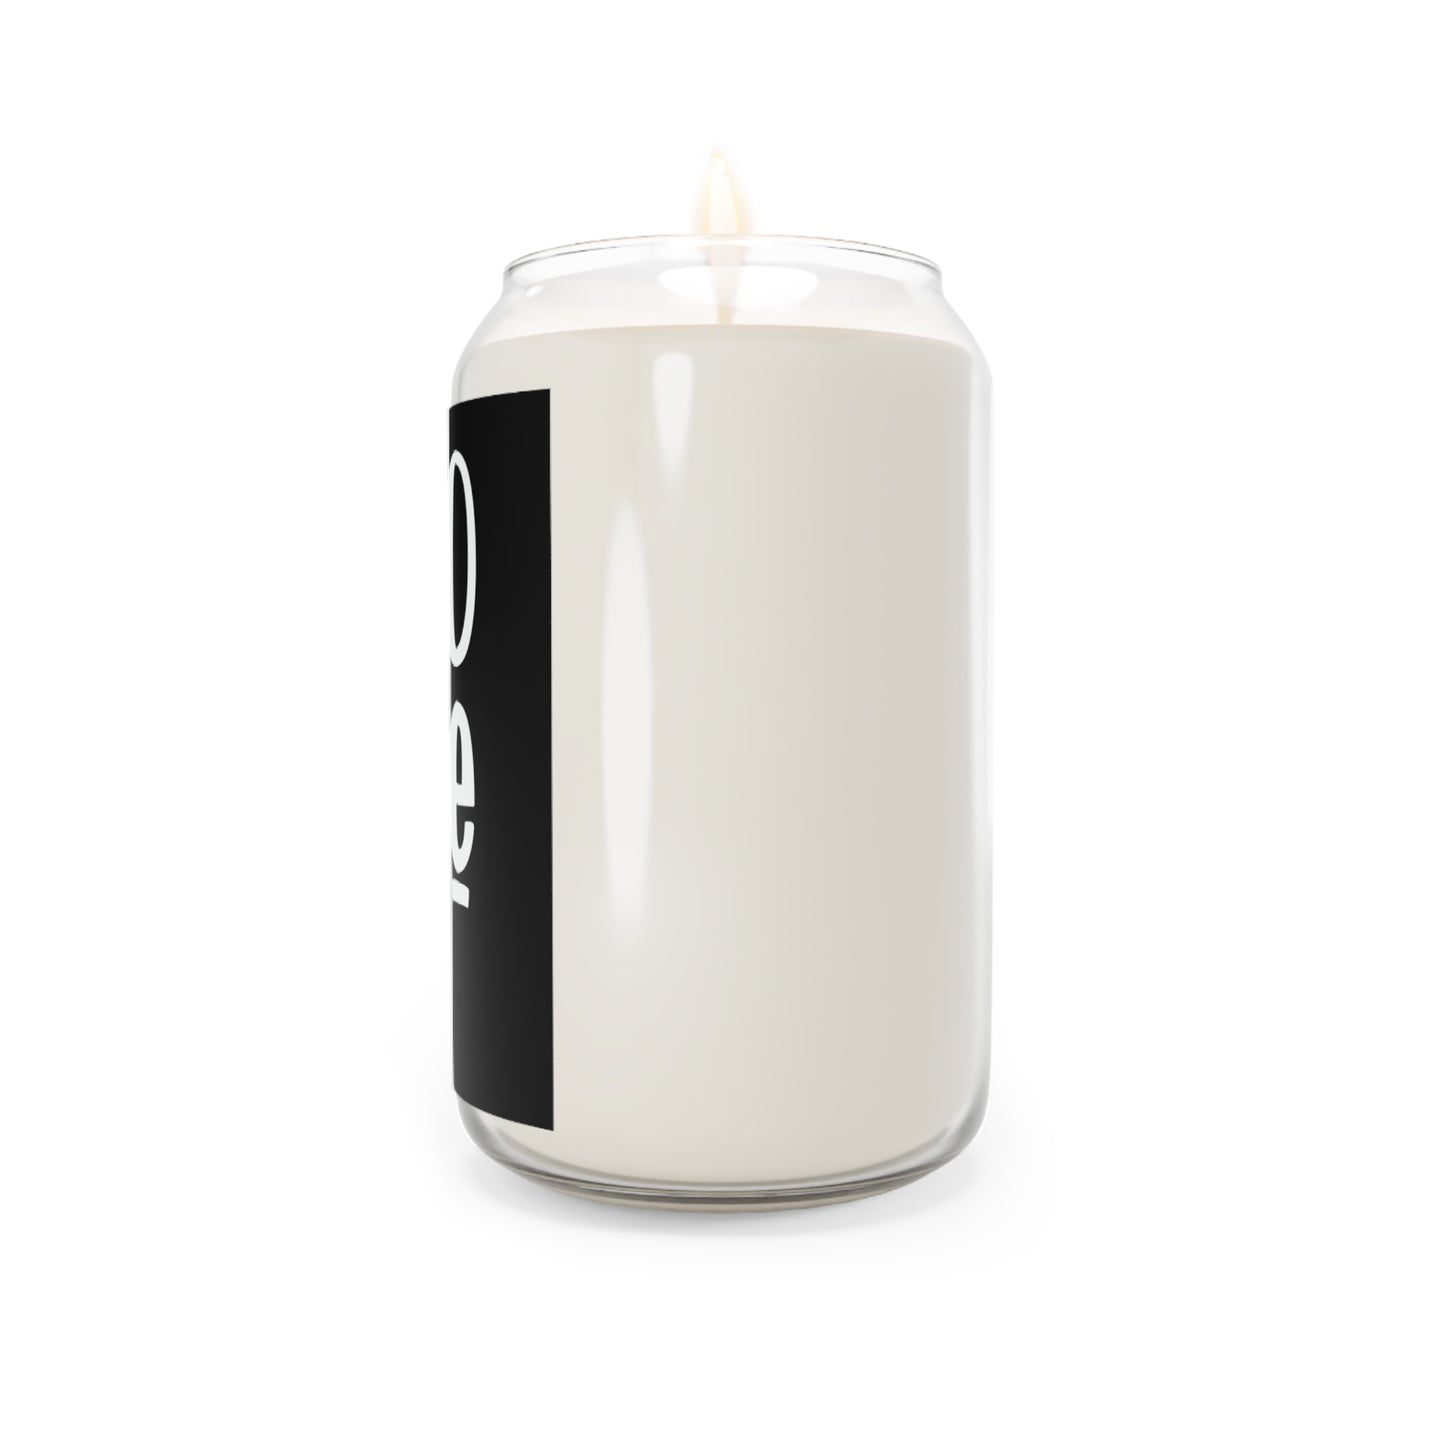 Peace and Love LGBTQ Candle